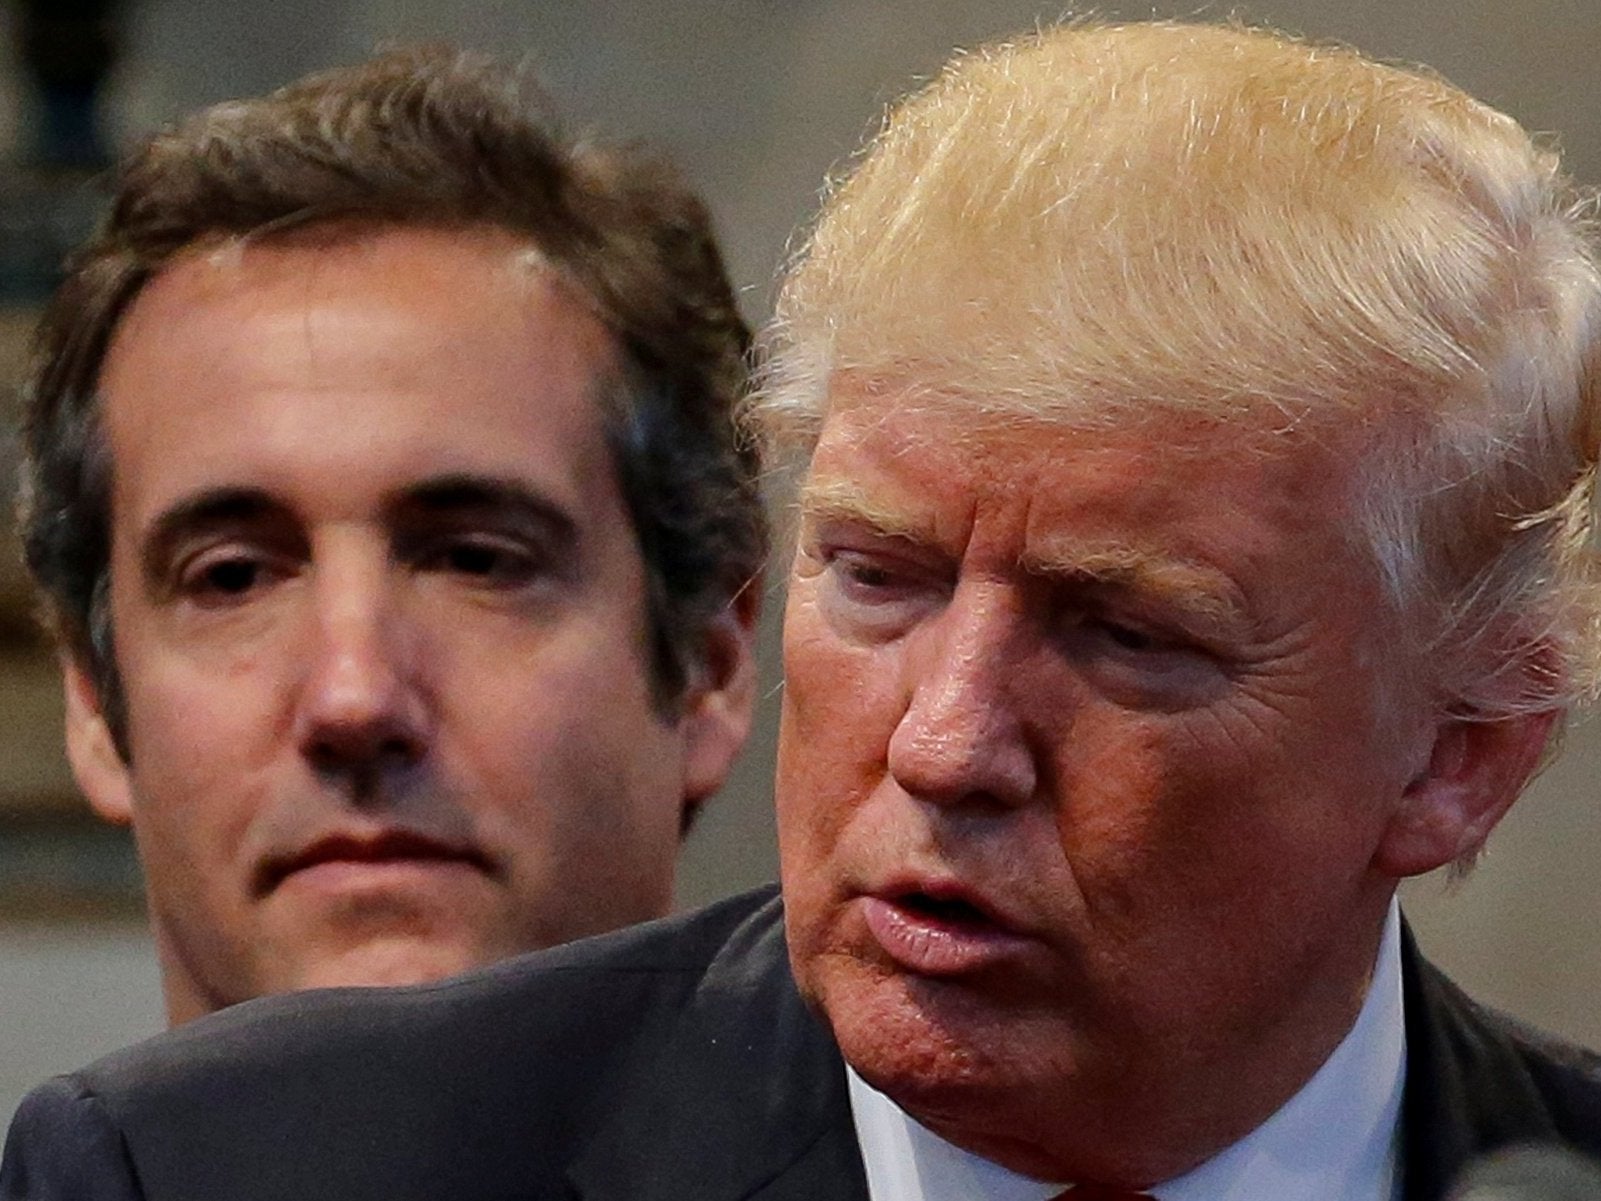 The US president with his then-lawyer Michael Cohen in September 2016